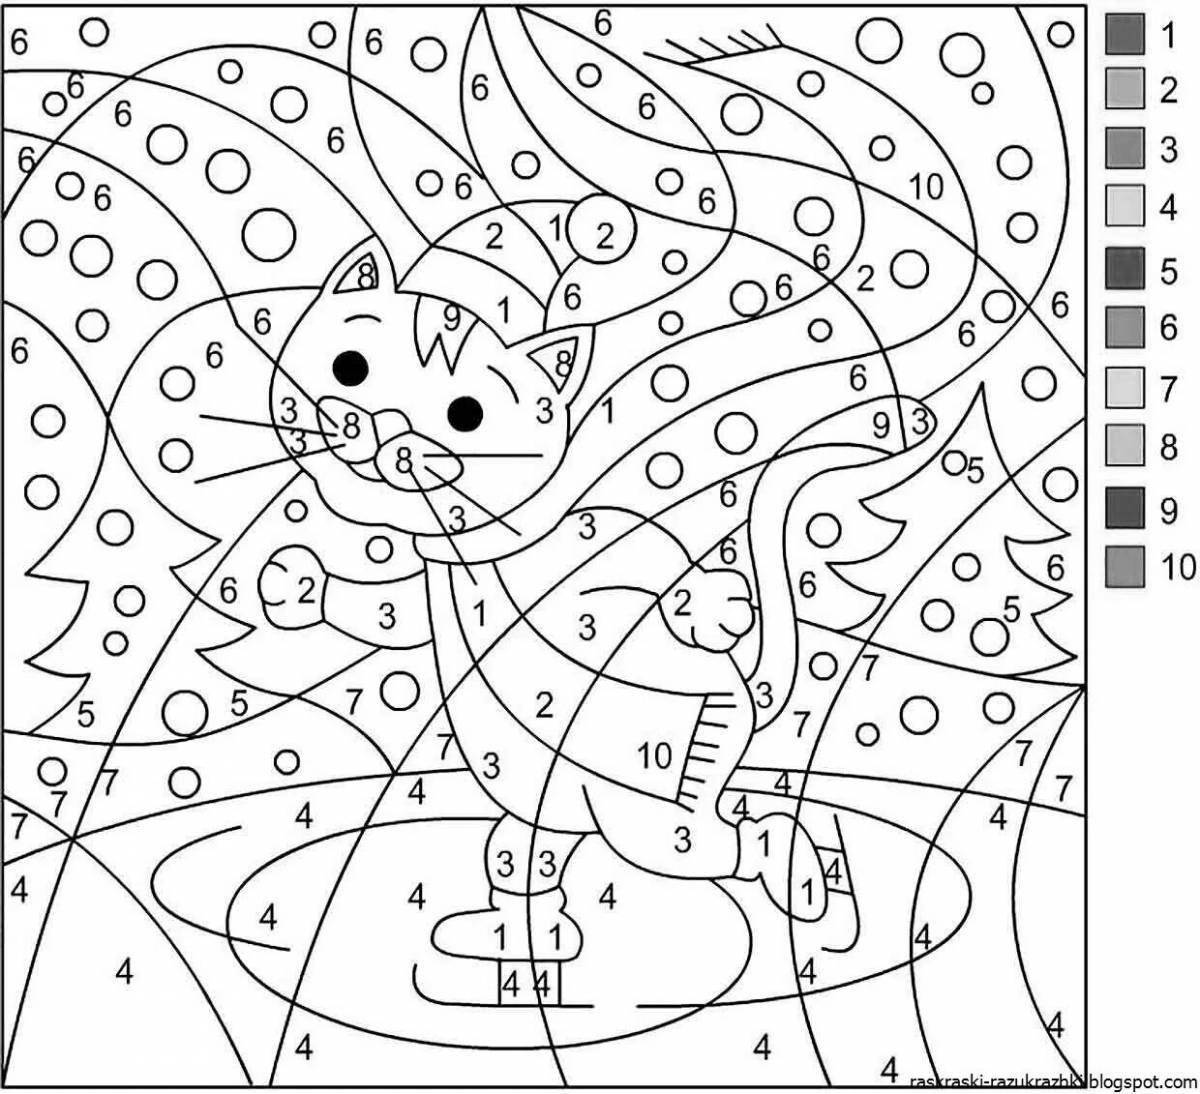 Fun coloring game for girls 6-7 years old